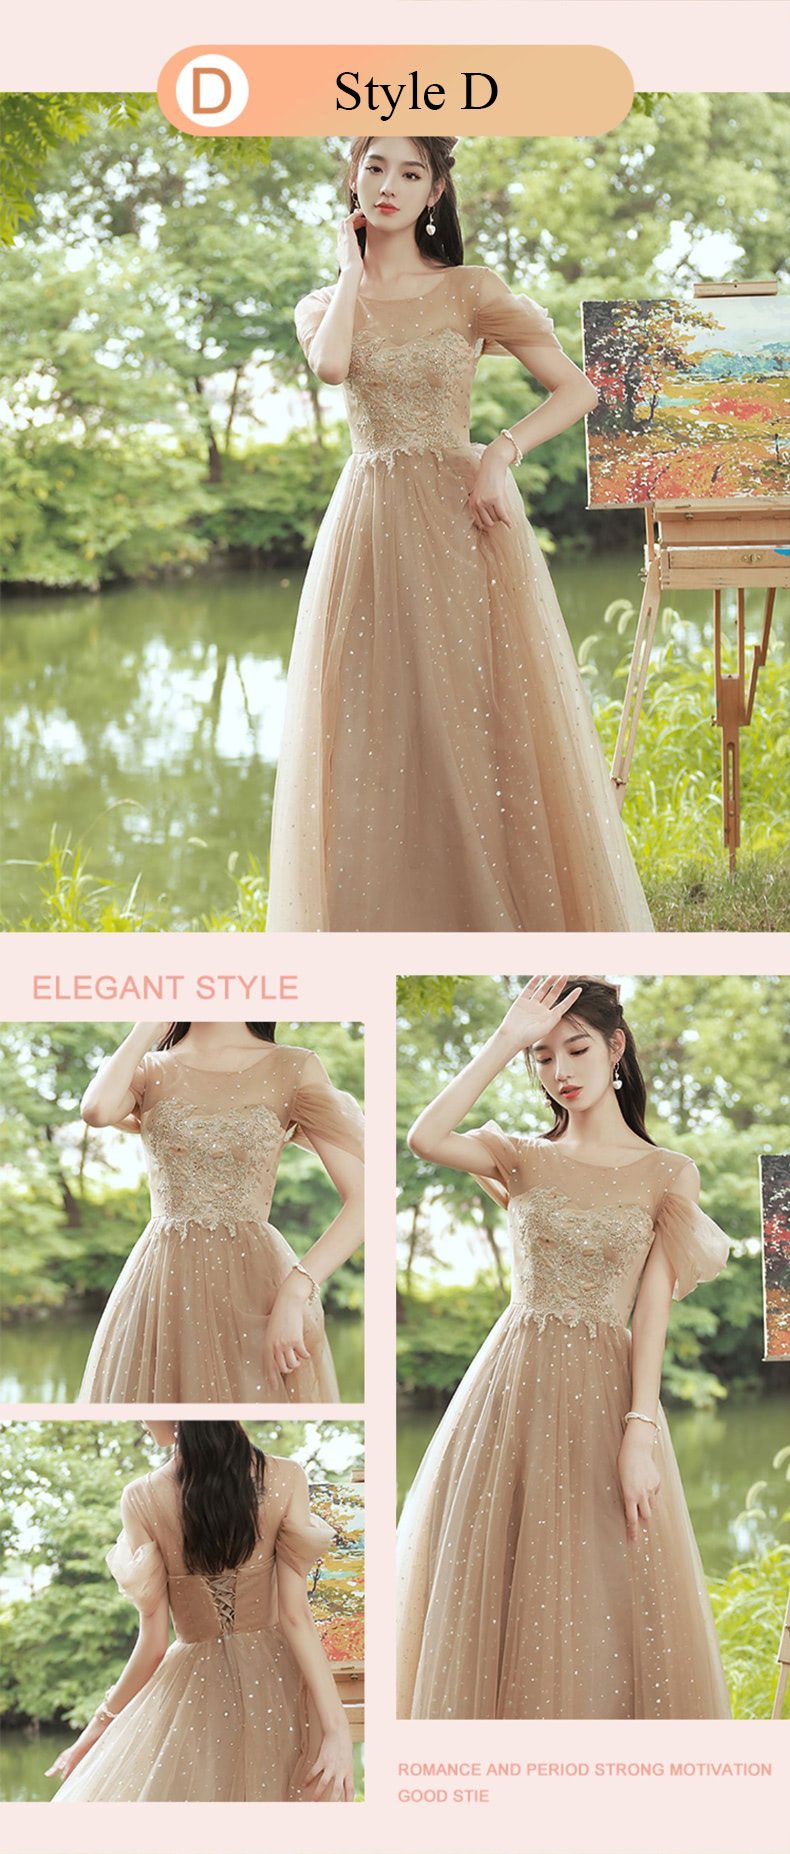 Champagne-Maid-of-Honor-Bridal-Party-Long-Dress-Bridesmaid-Gown21.jpg